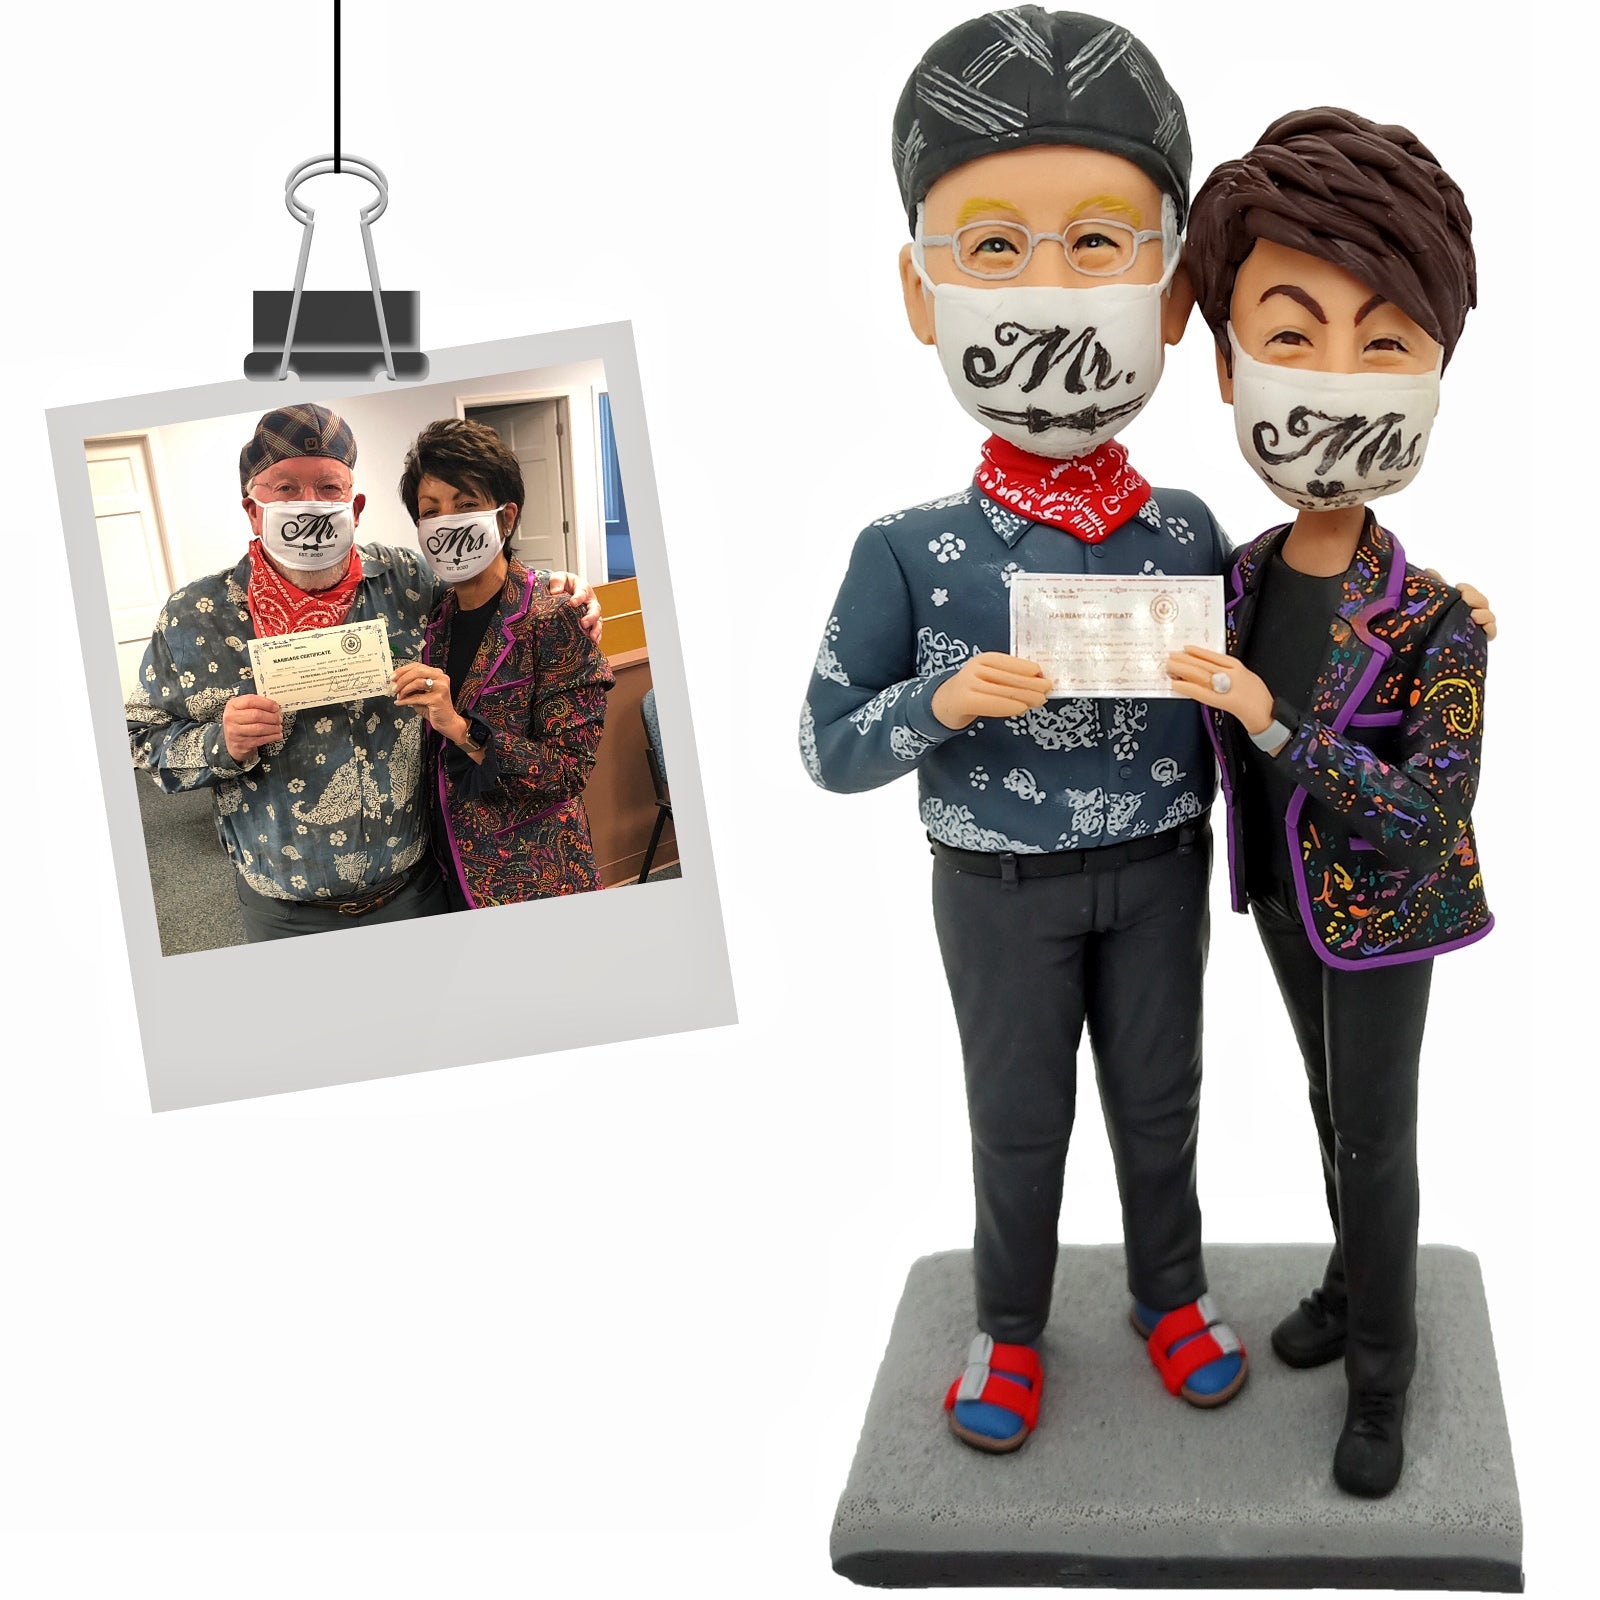 Double the Fun with Our Custom Couple Bobbleheads - Perfect for Anniversary or Valentine's Day